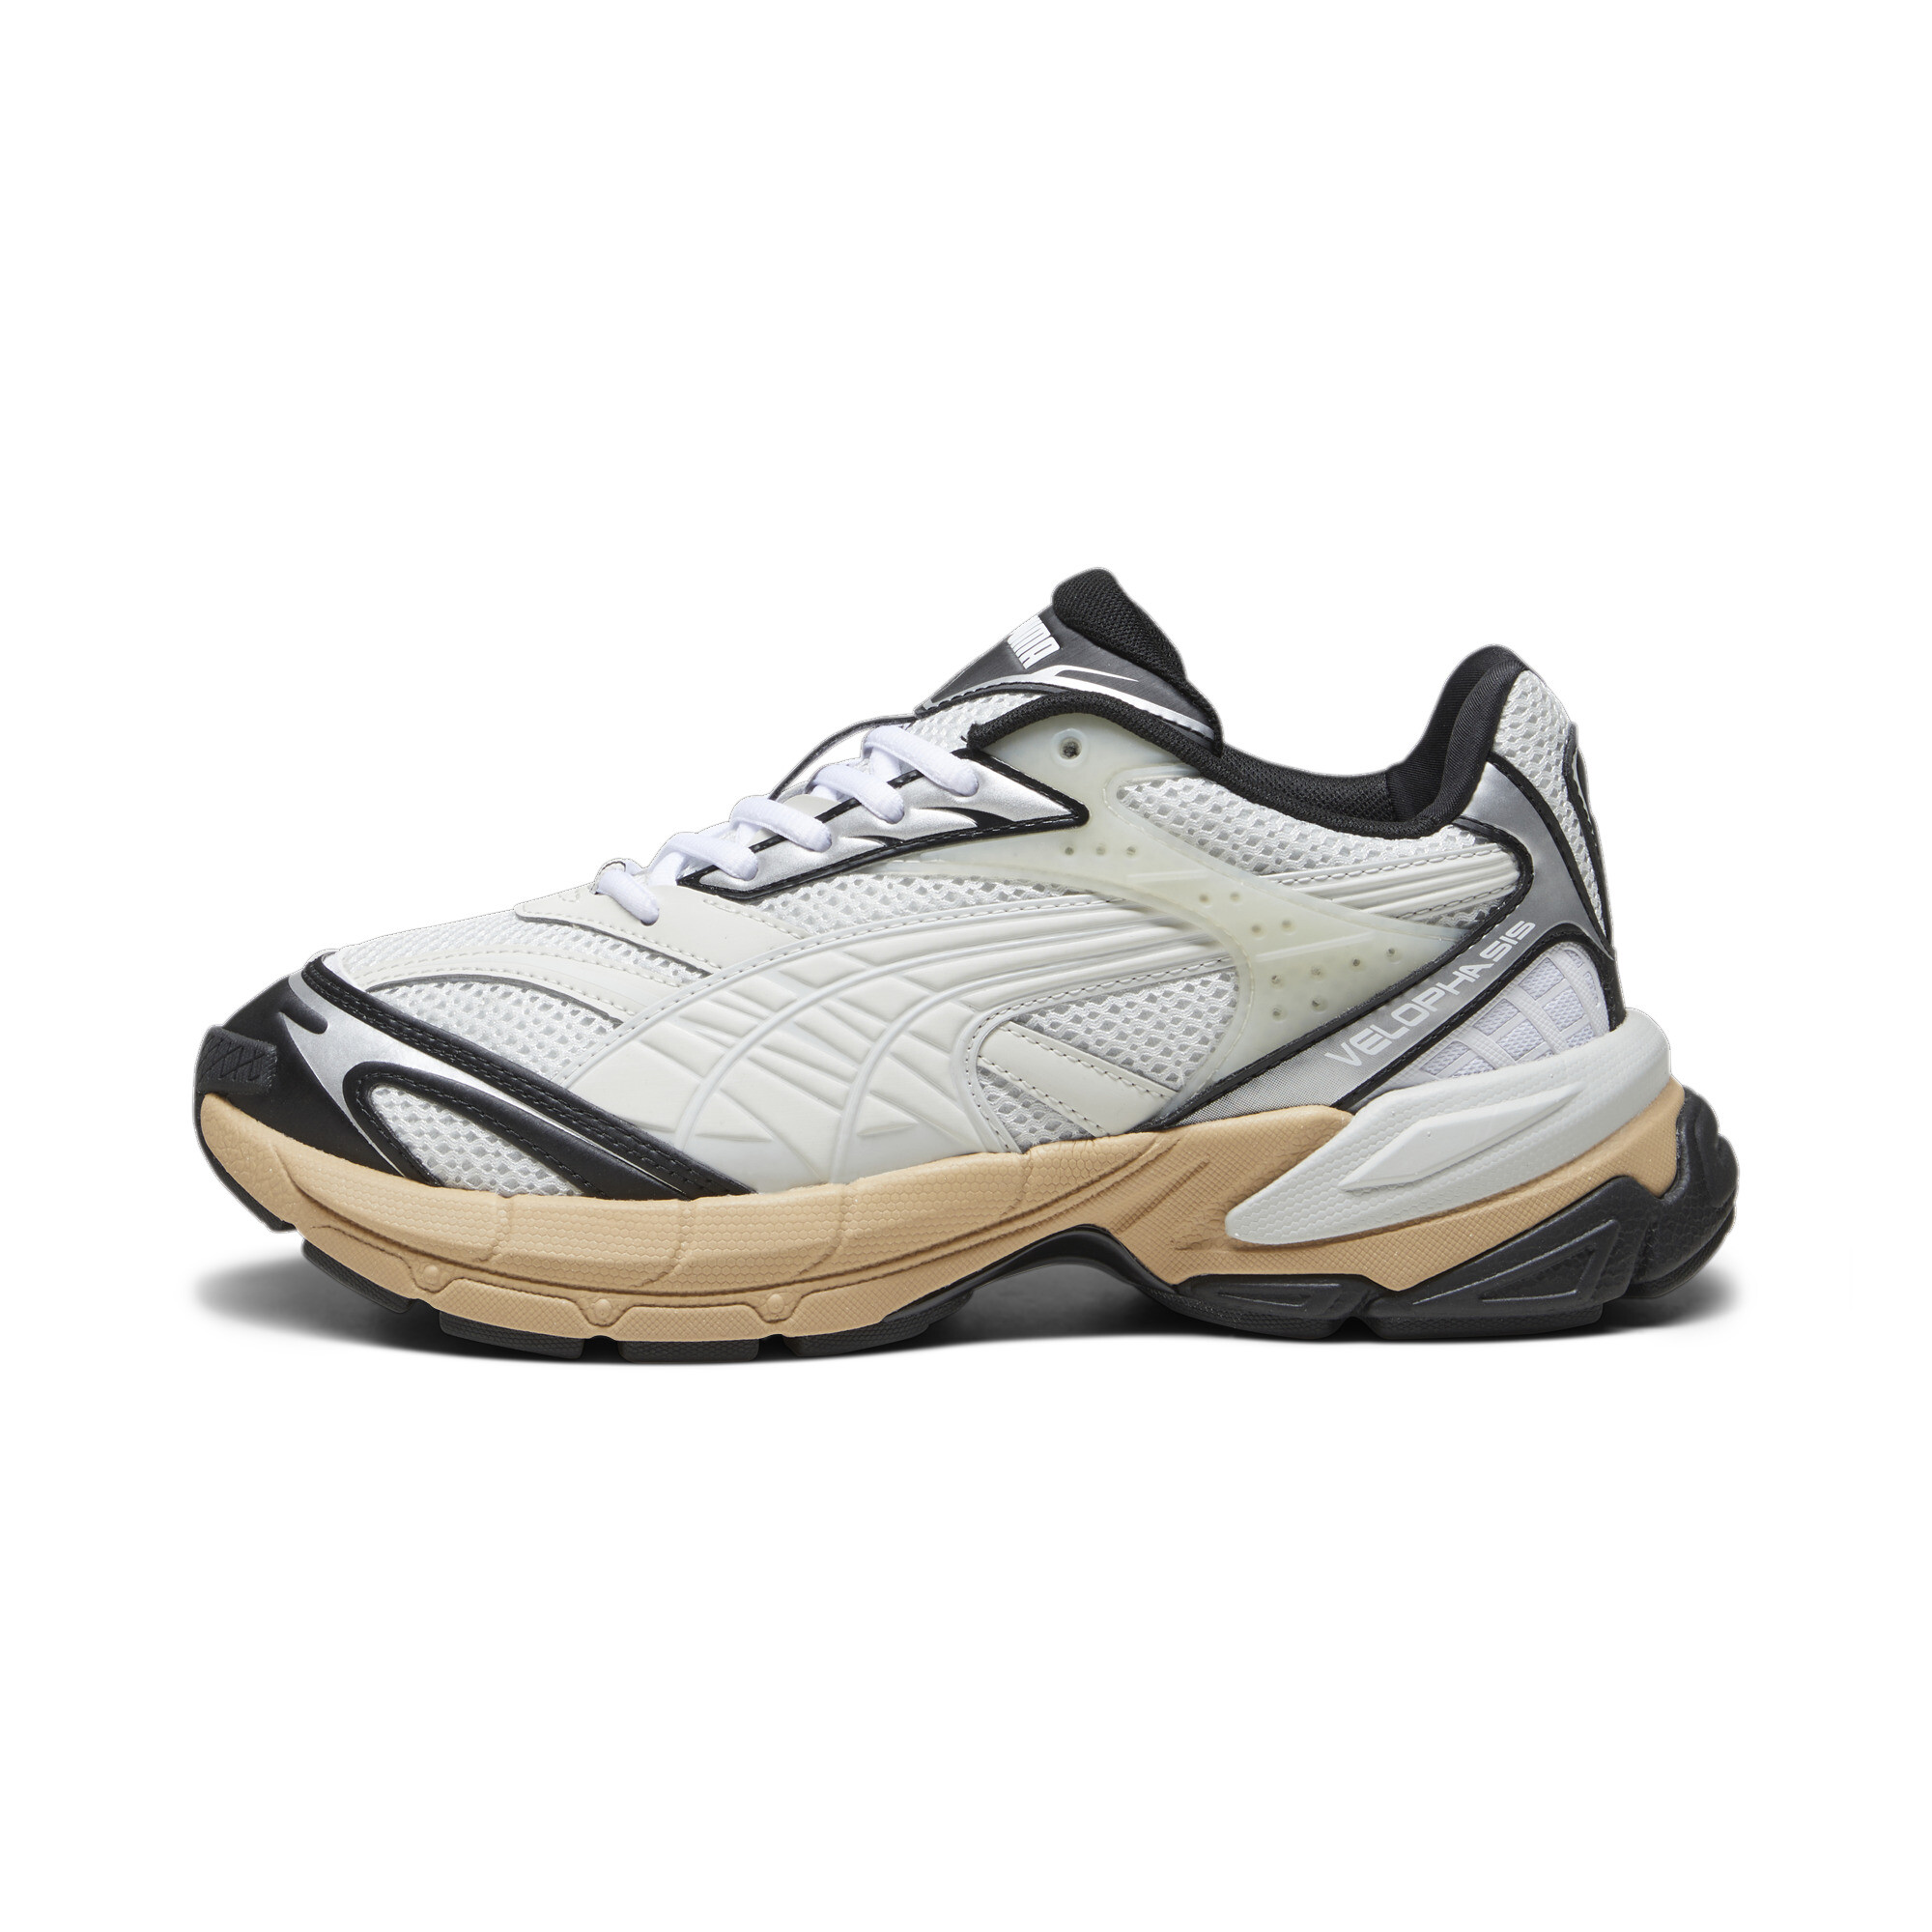 Puma Velophasis Technisch Sneakers, Gray, Size 43, Shoes